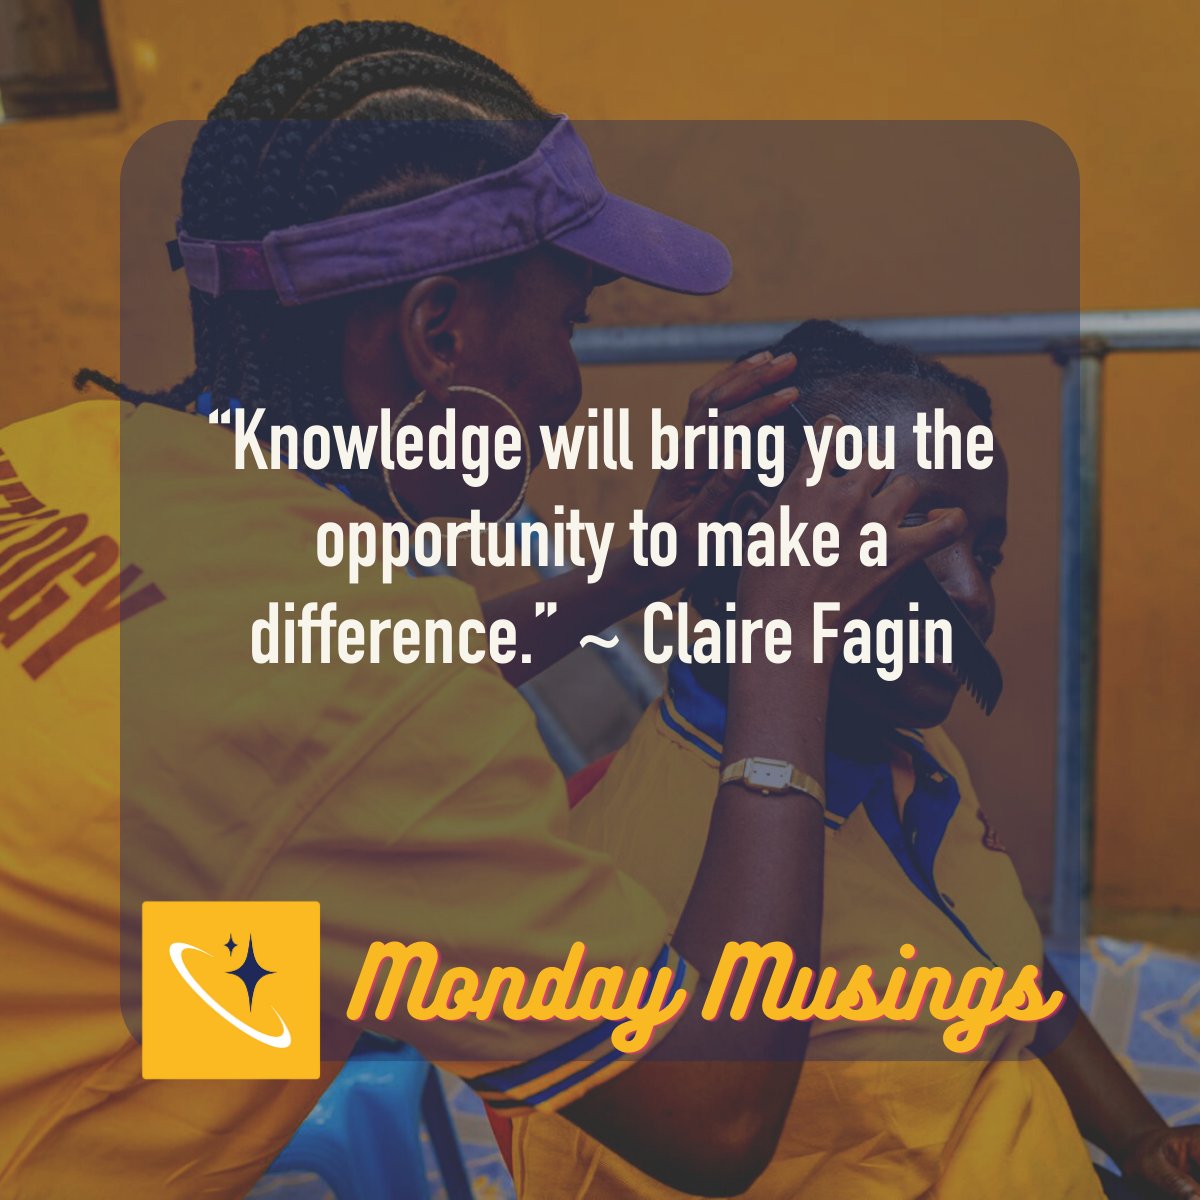 Monday Musings... Are you ready to use your skills and knowledge to make a difference in your community? Please share your thoughts. #education #knowledge #makingdifference #ClaireFagin